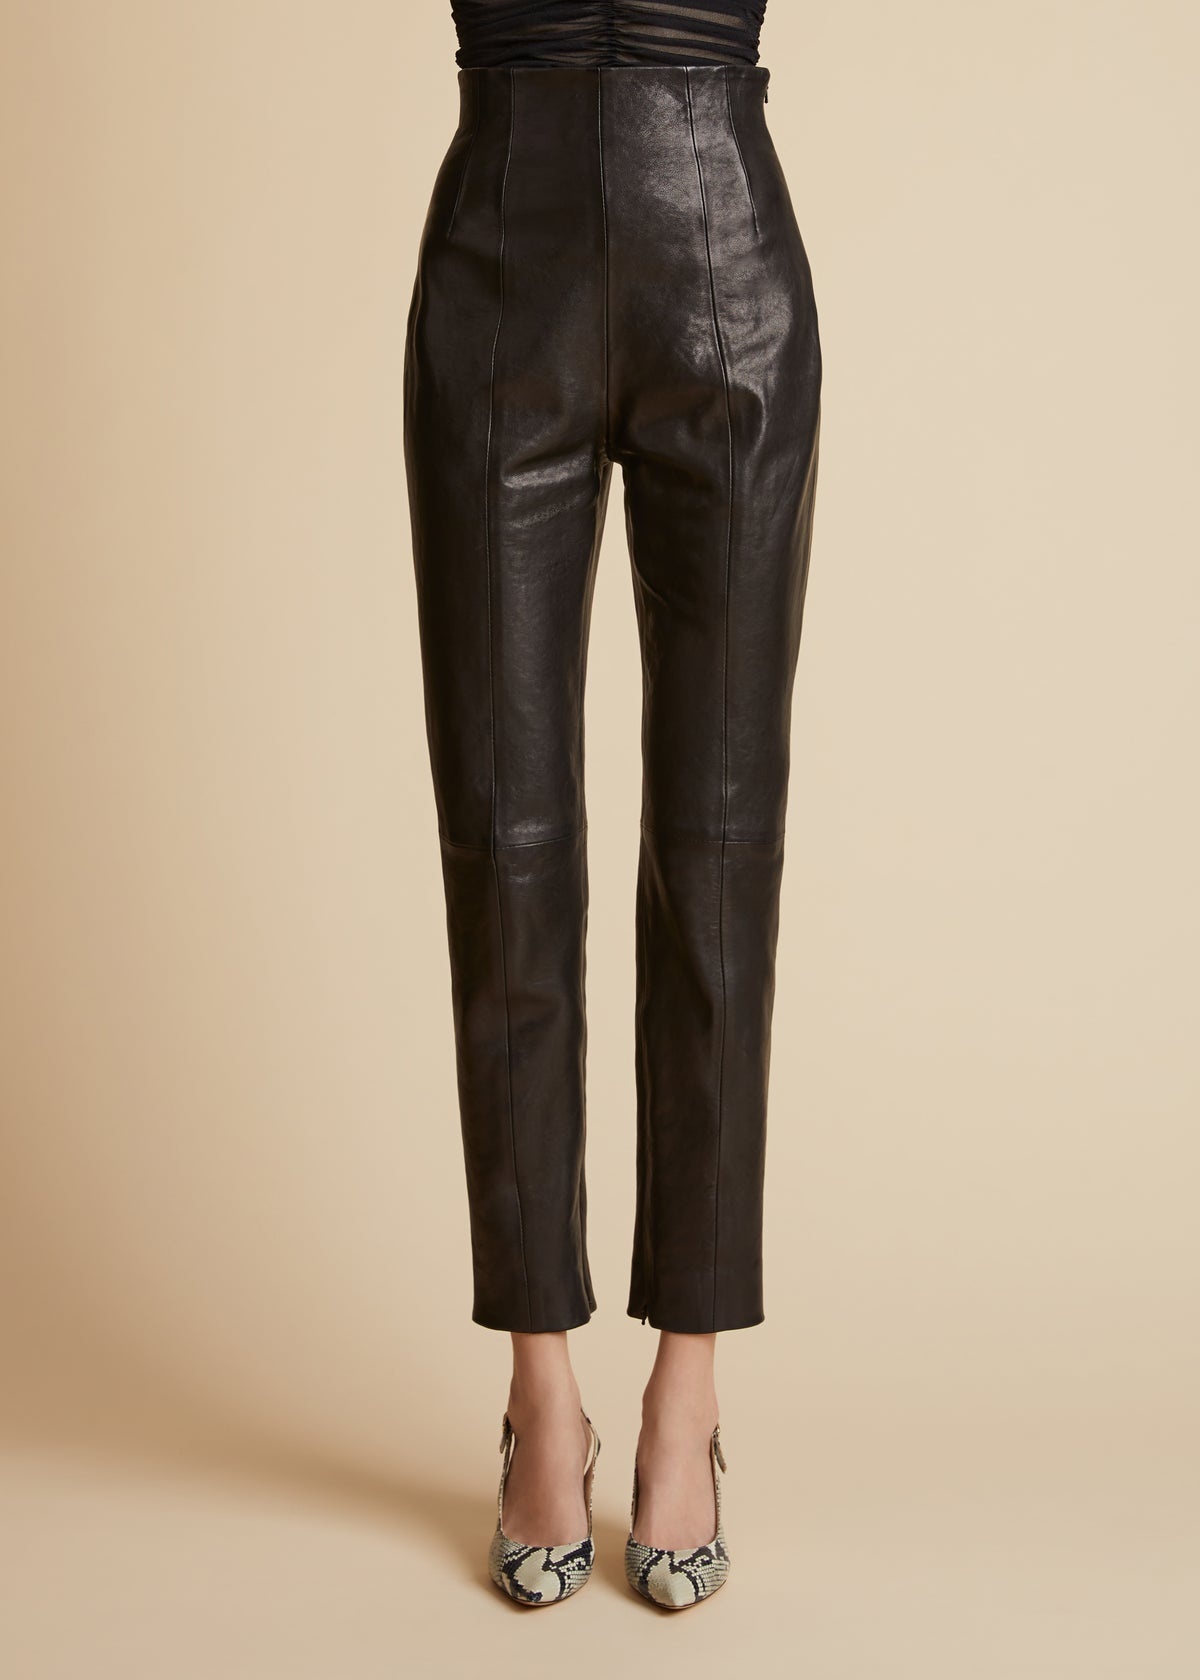 The Lenn Pant in Black Leather - 1